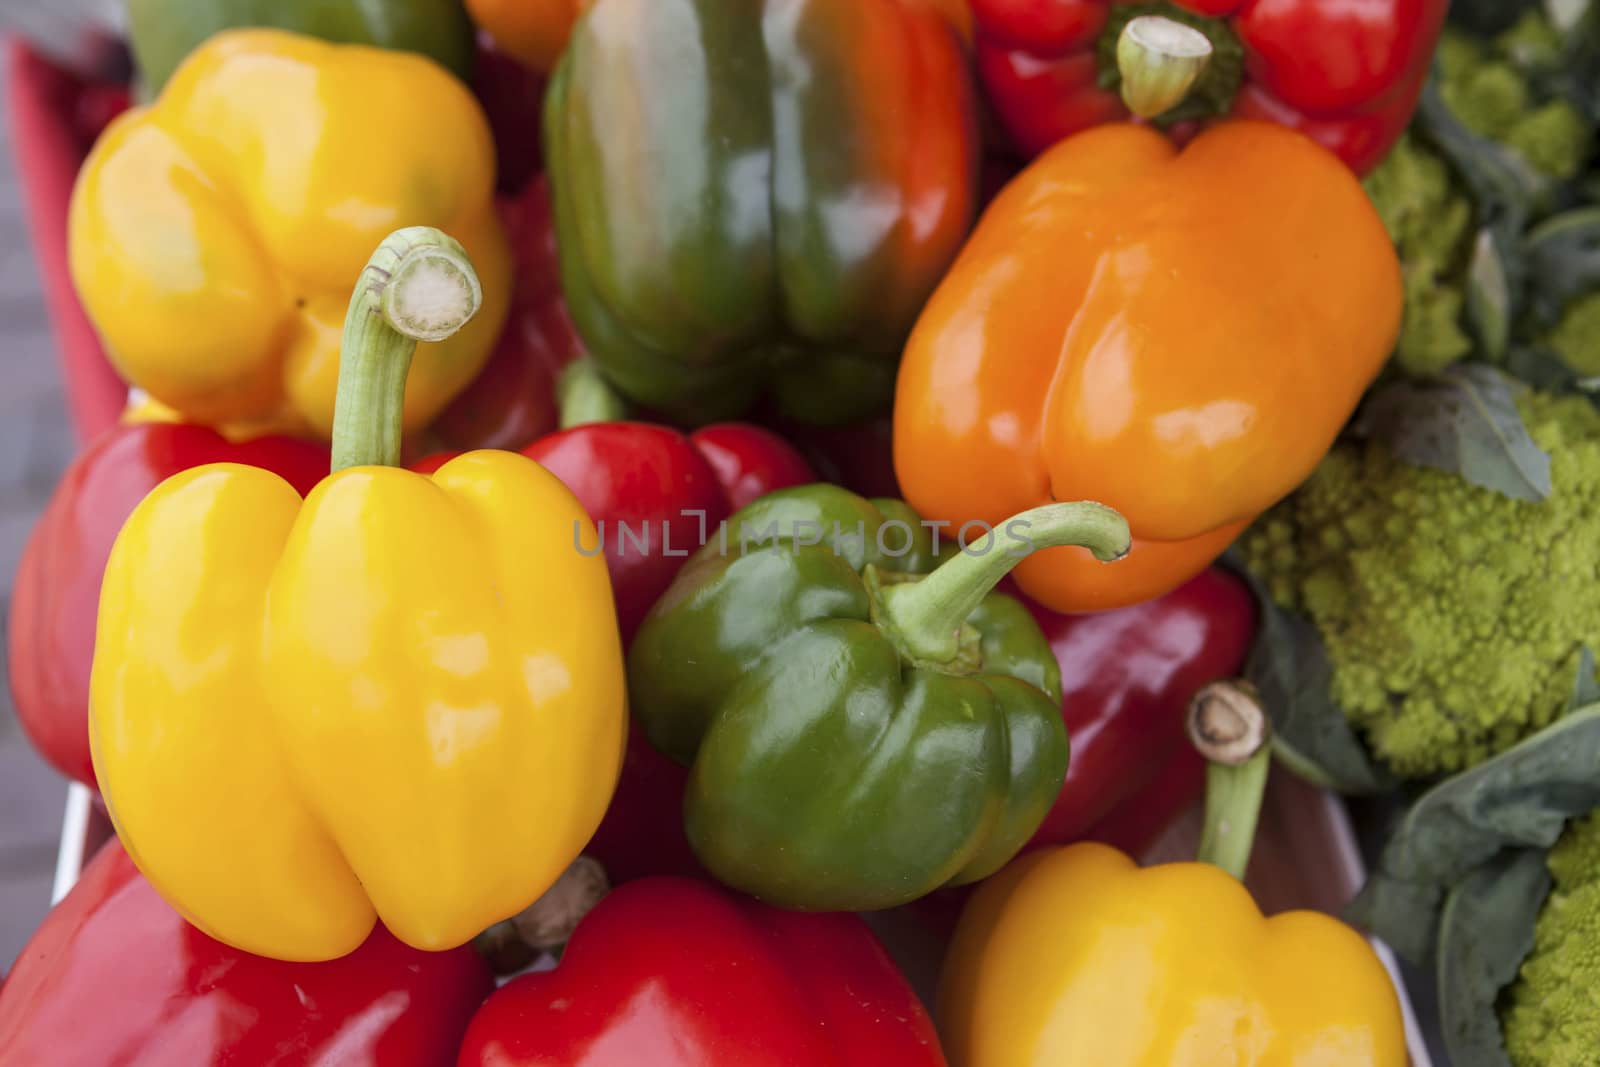 Fresh sweet peppers at the market by mcherevan